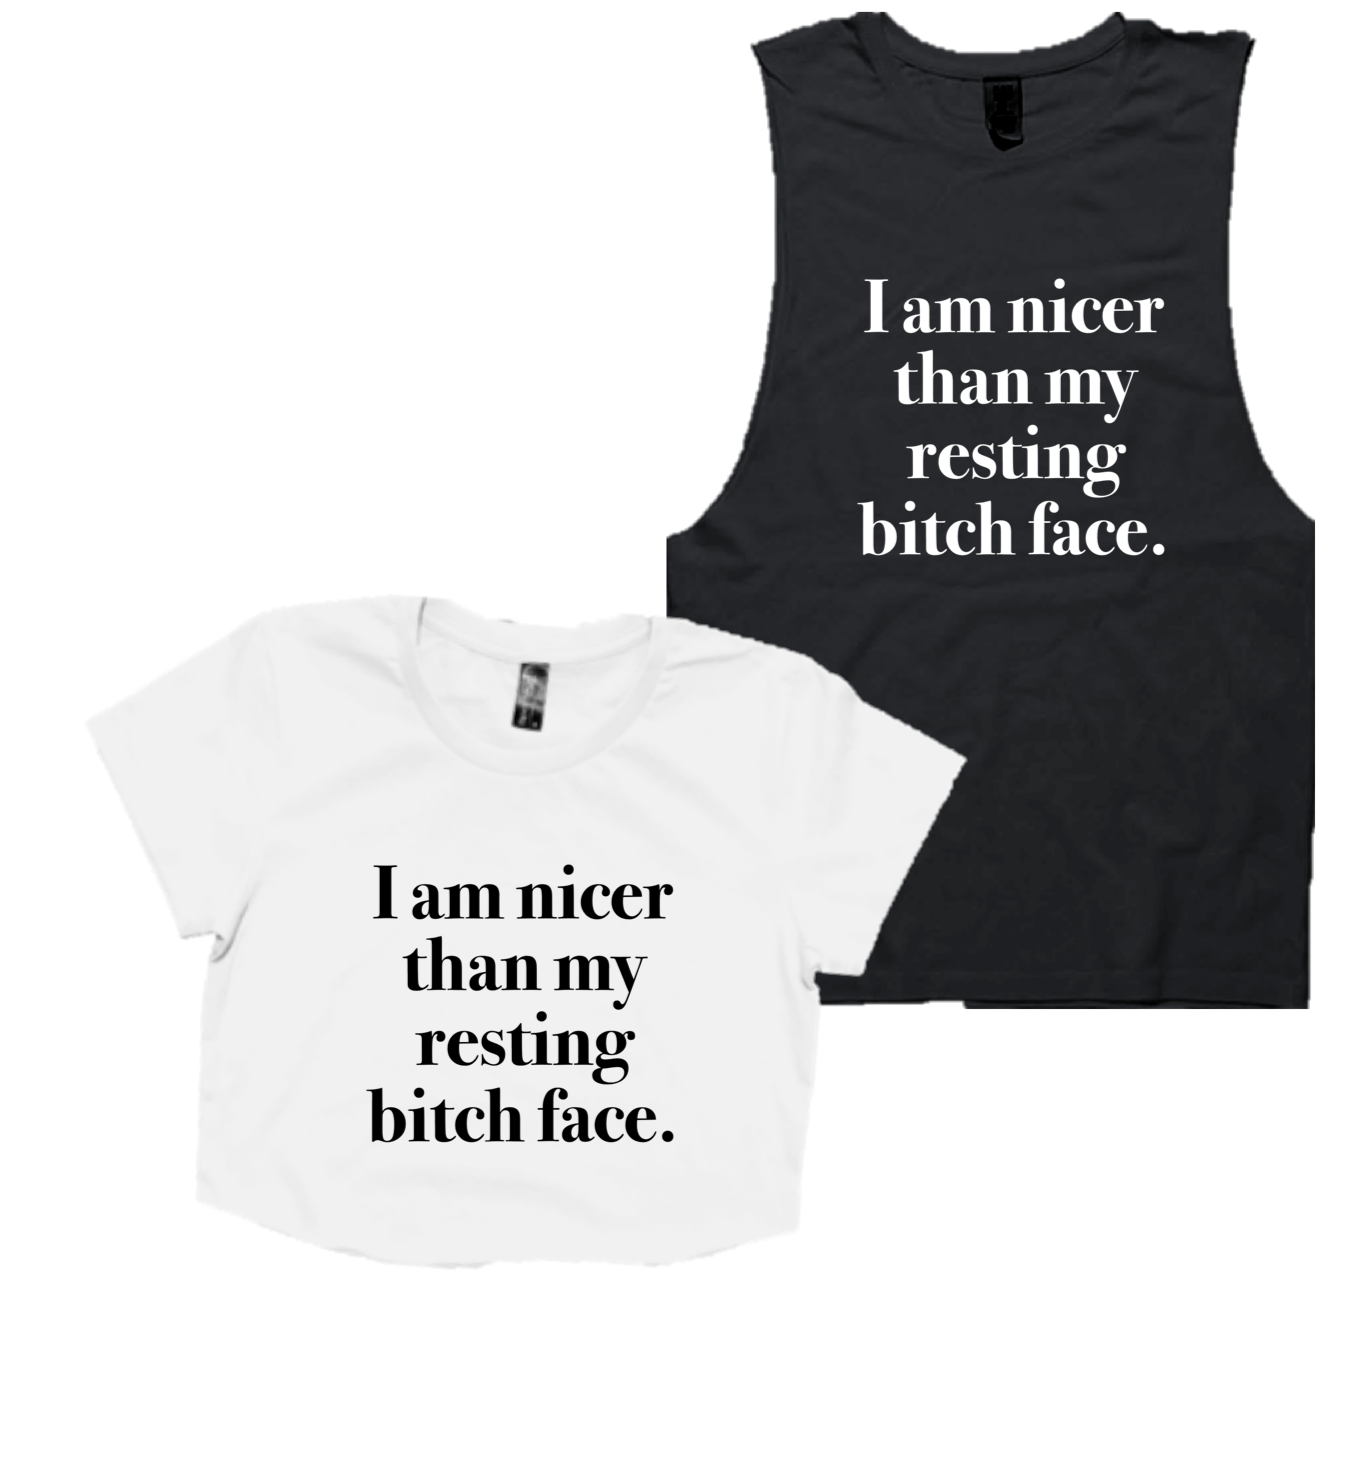 I AM NICER THAN MY RESTING BITCH FACE.